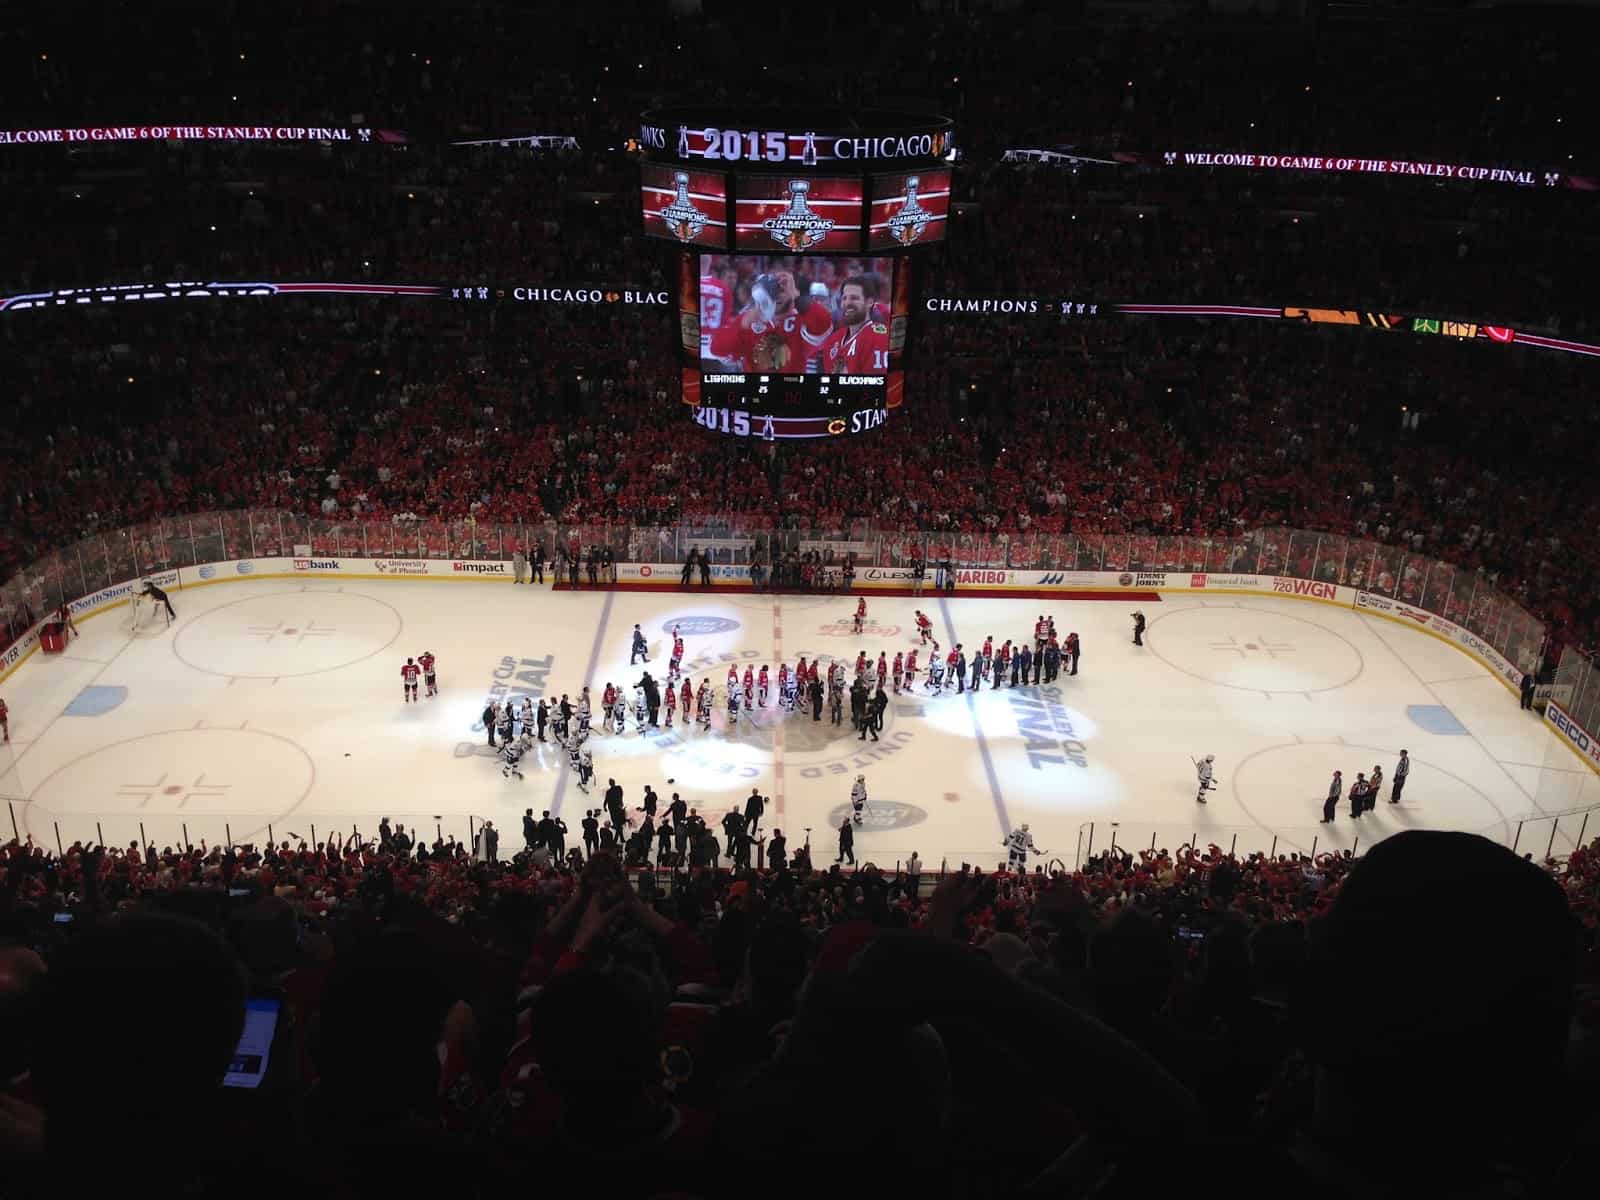 Handshakes at Game 6 of the 2015 Stanley Cup Finals at the United Center in Chicago